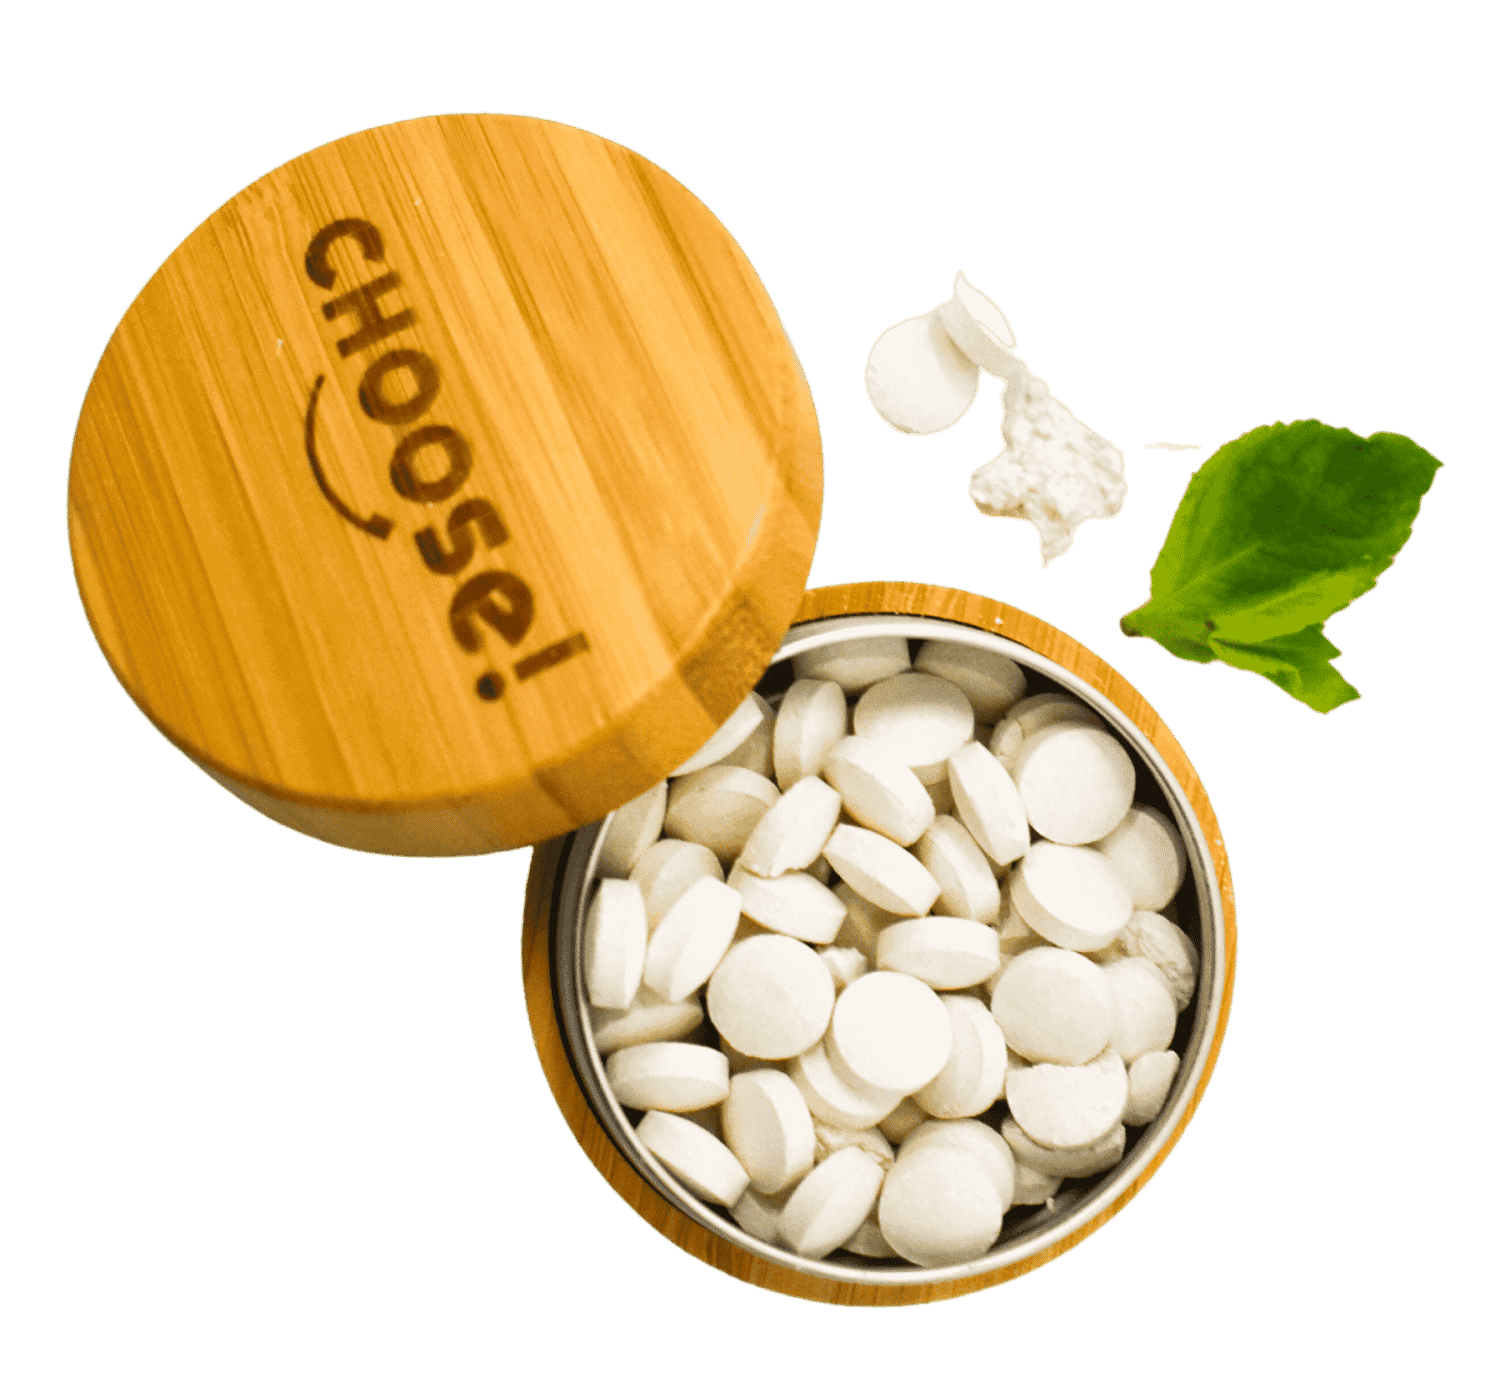 Choose toothpaste tablets in bamboo tray with mint leaves